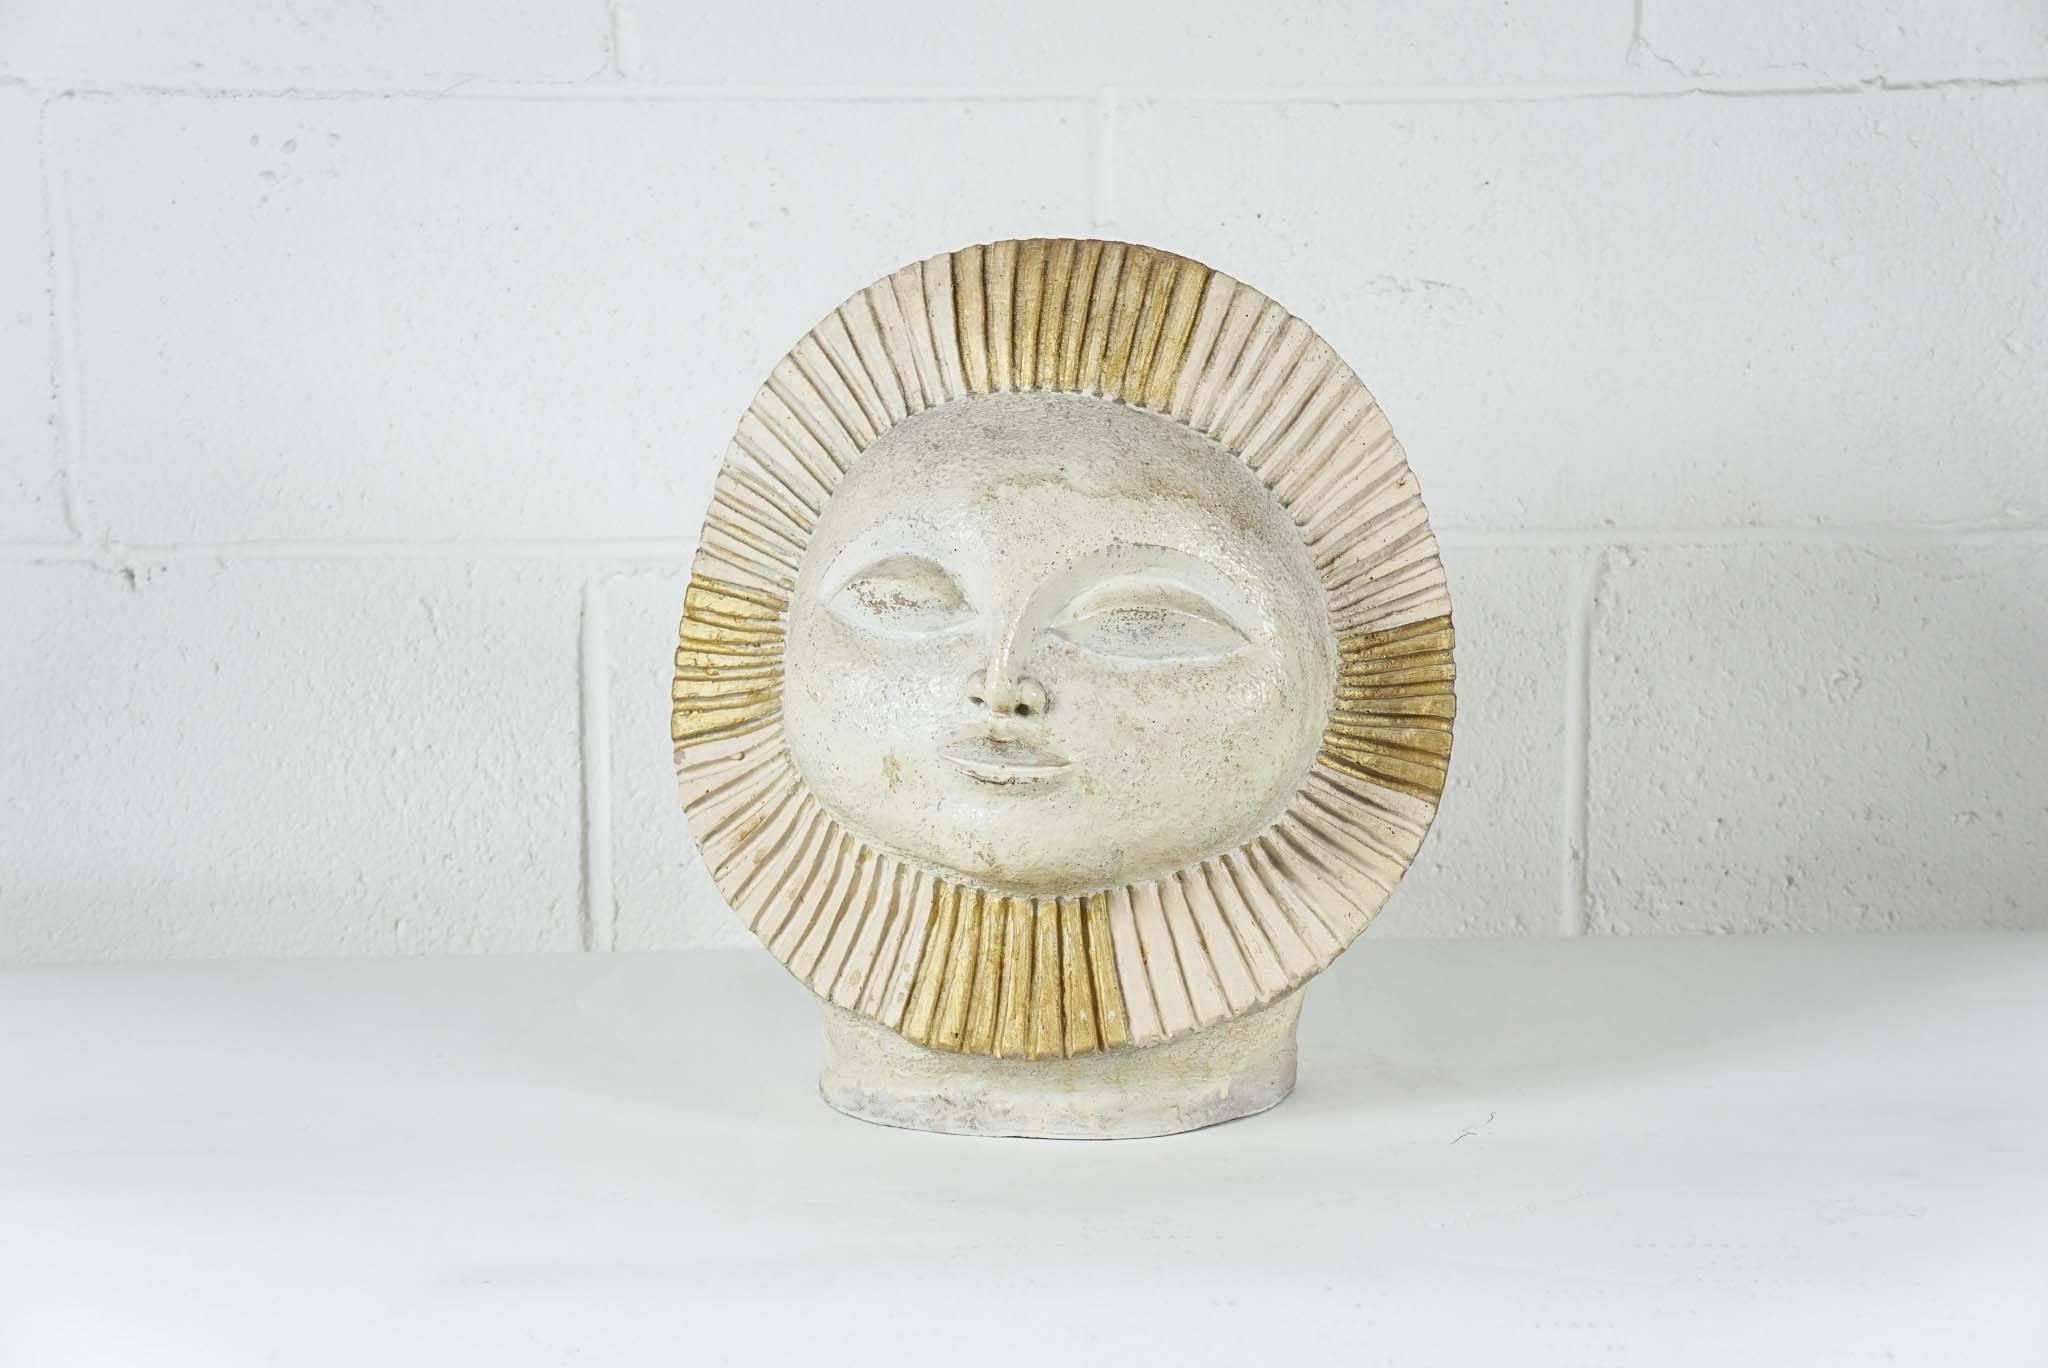 Here is a modern sculpture of a sun face in a textured ceramic with light gold accents. The sculpture is by Paul Ballardo incised with the marking Austin Ceramic Products, 1968.